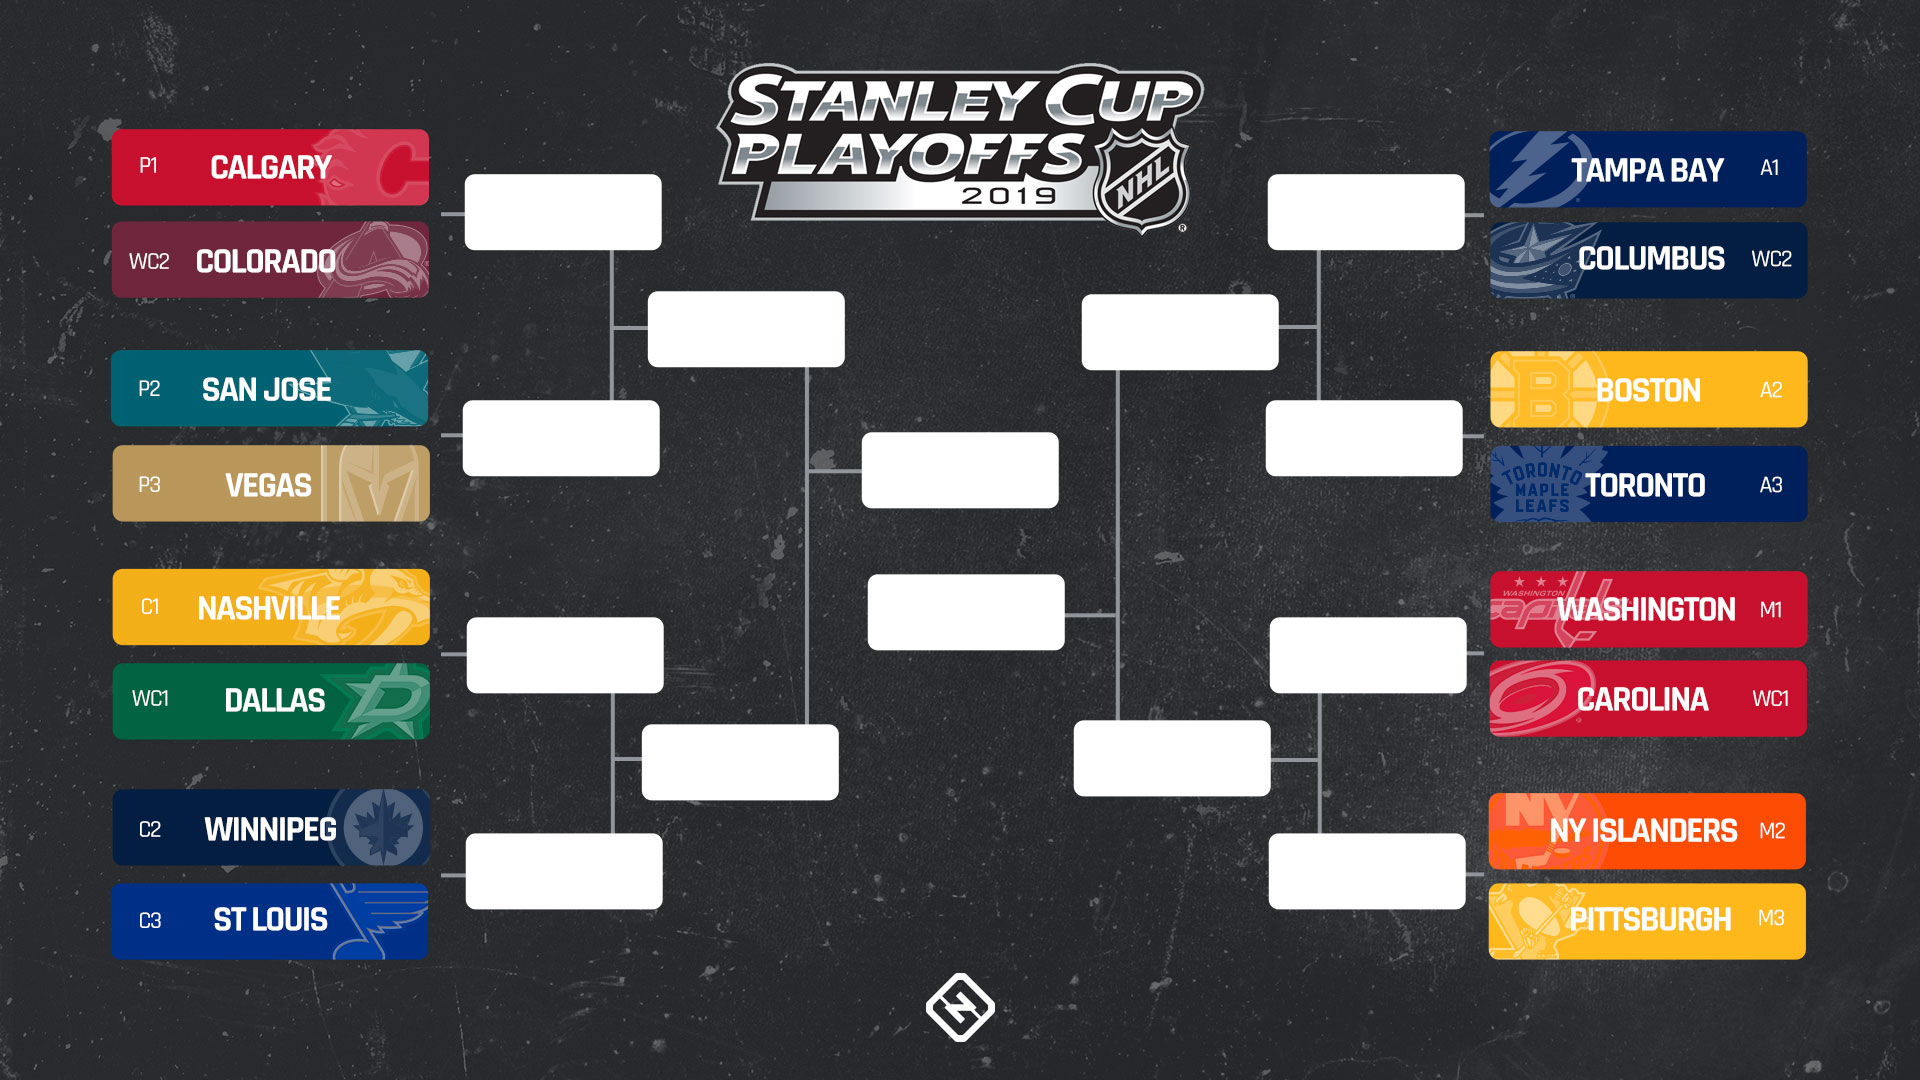 NHL playoffs schedule 2019: Full bracket, dates, times, TV channels for